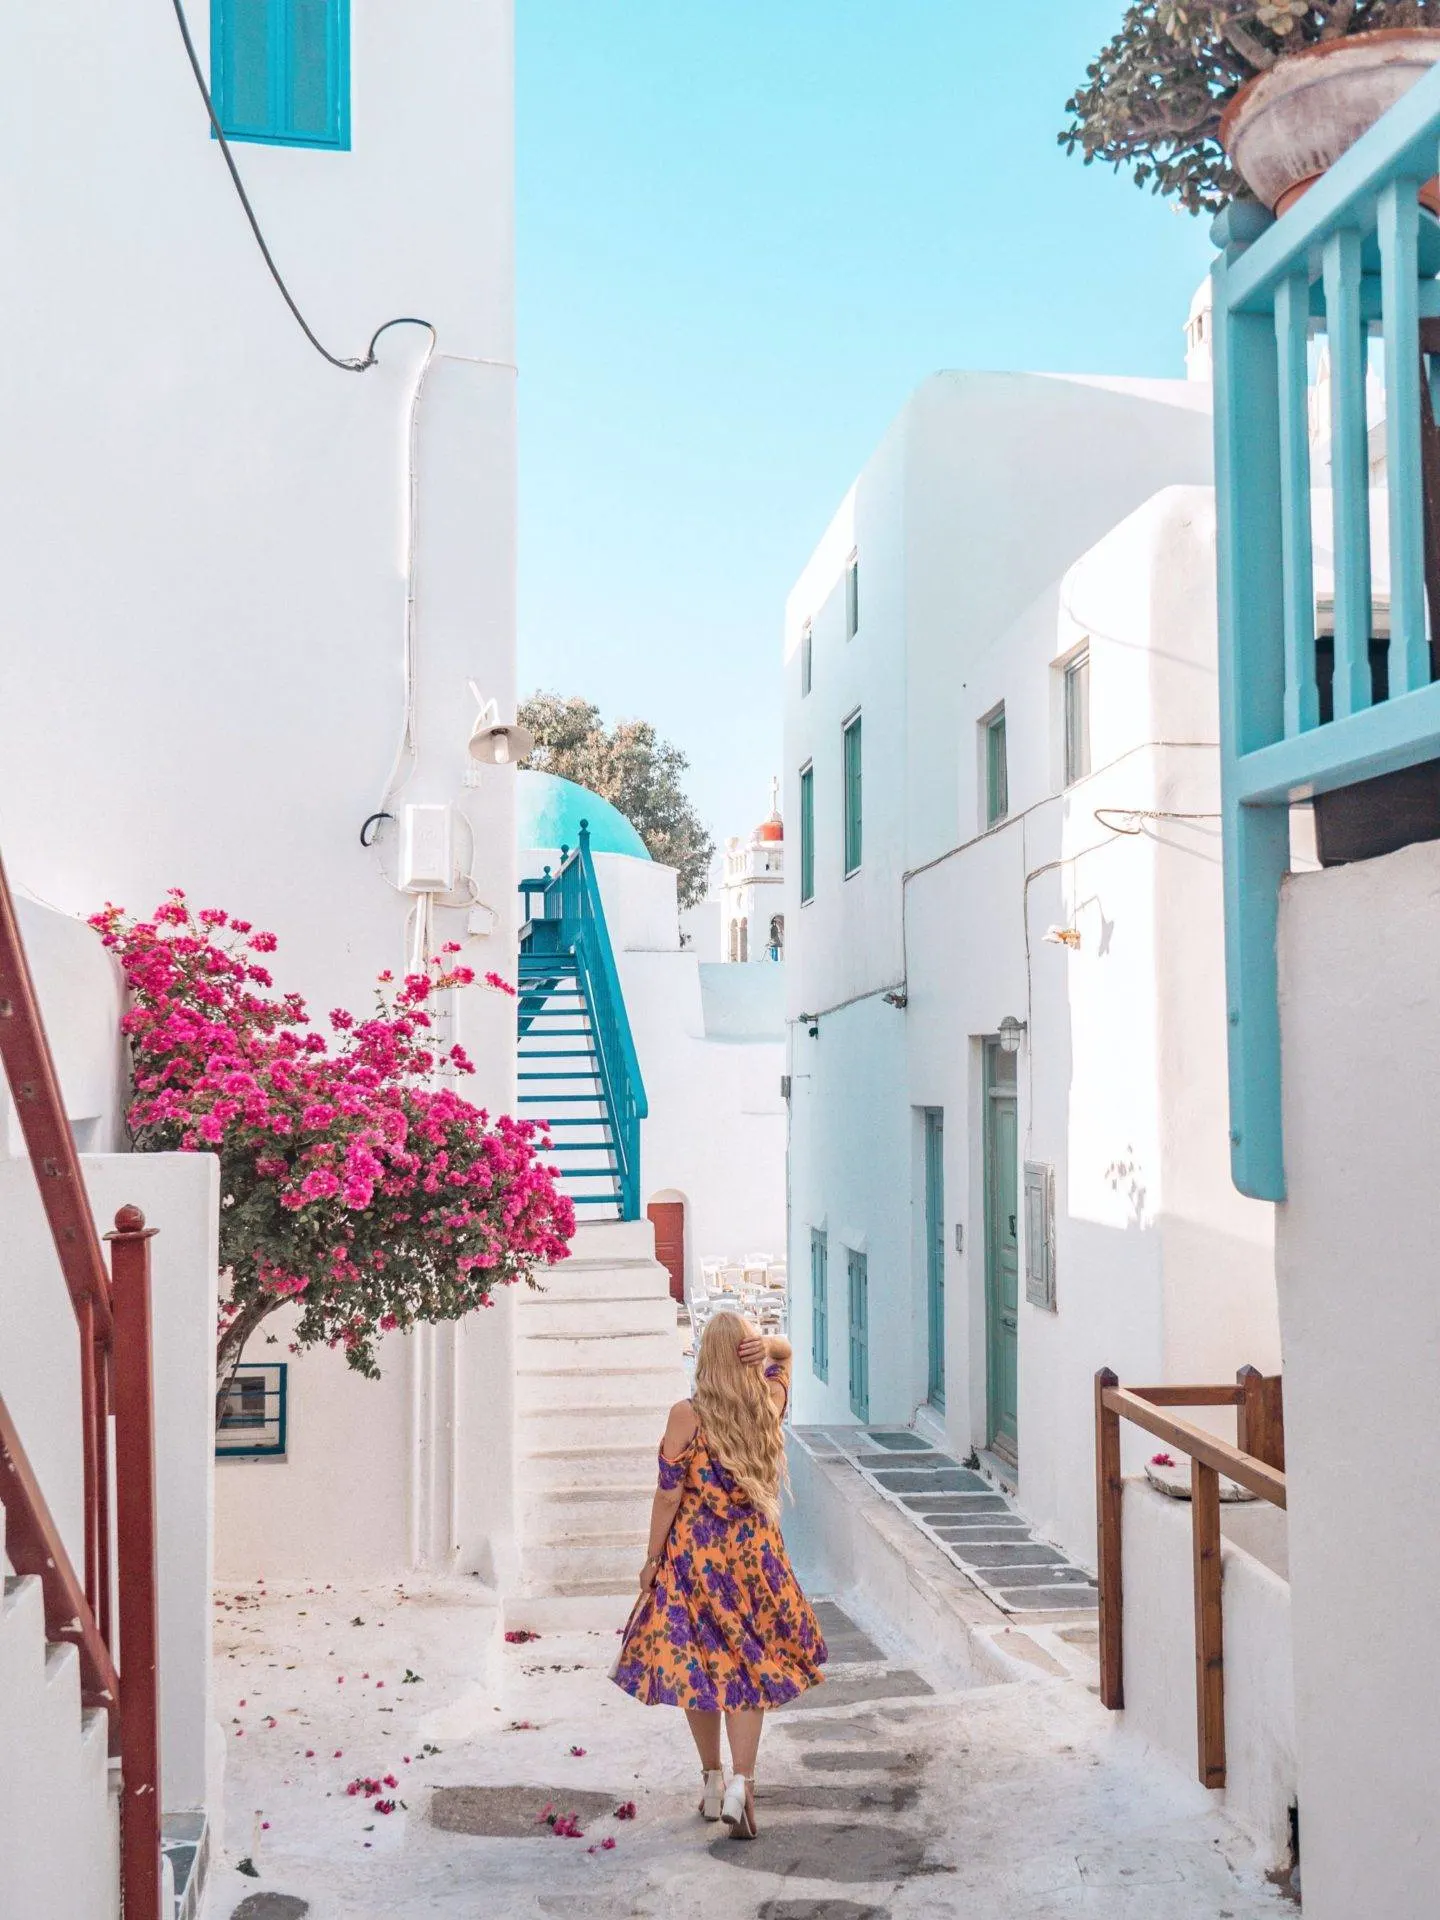 Most Instagrammable Places in Mykonos: The streets of Old Town Mykonos. Click the photo to see the rest of my list of the most instagrammable places in Mykonos! 